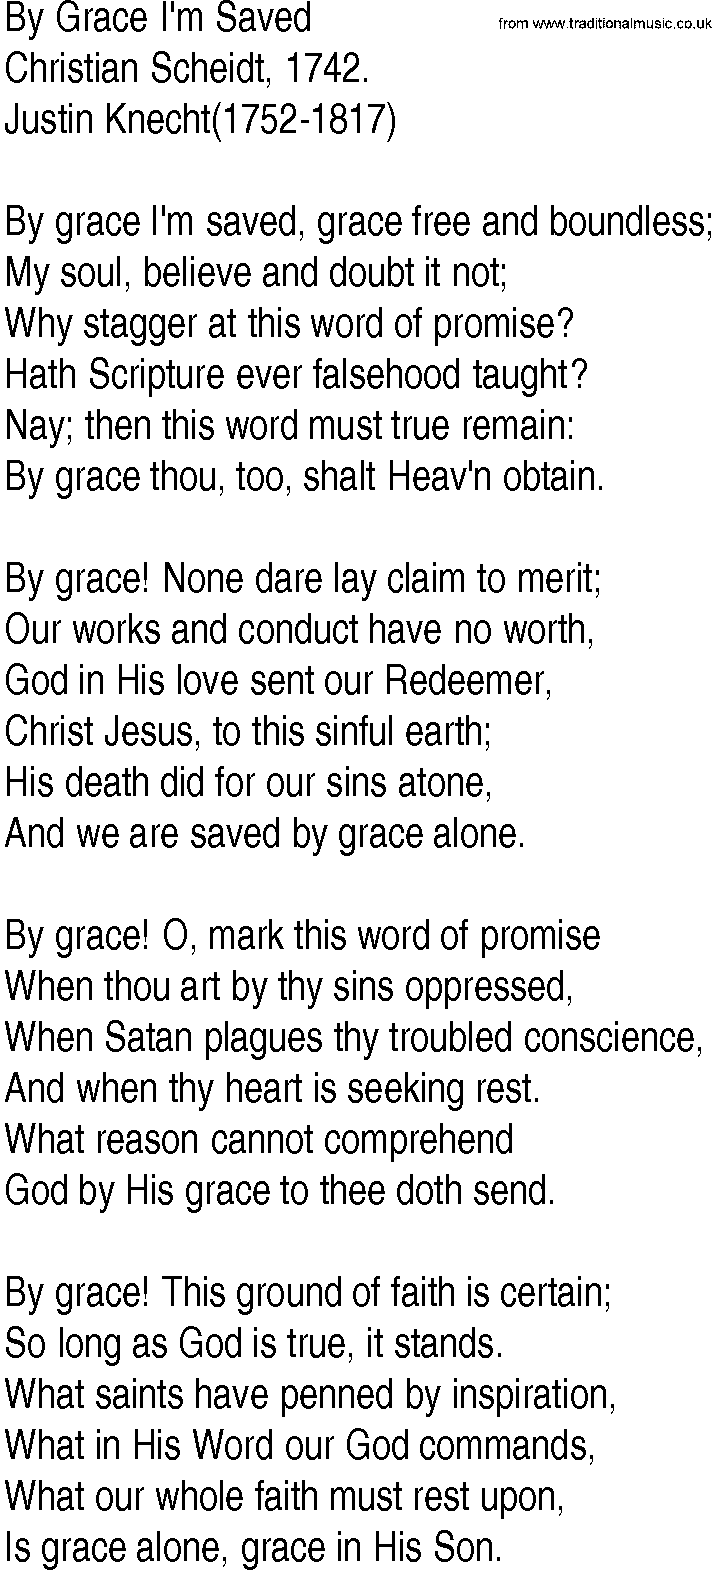 Hymn and Gospel Song: By Grace I'm Saved by Christian Scheidt lyrics